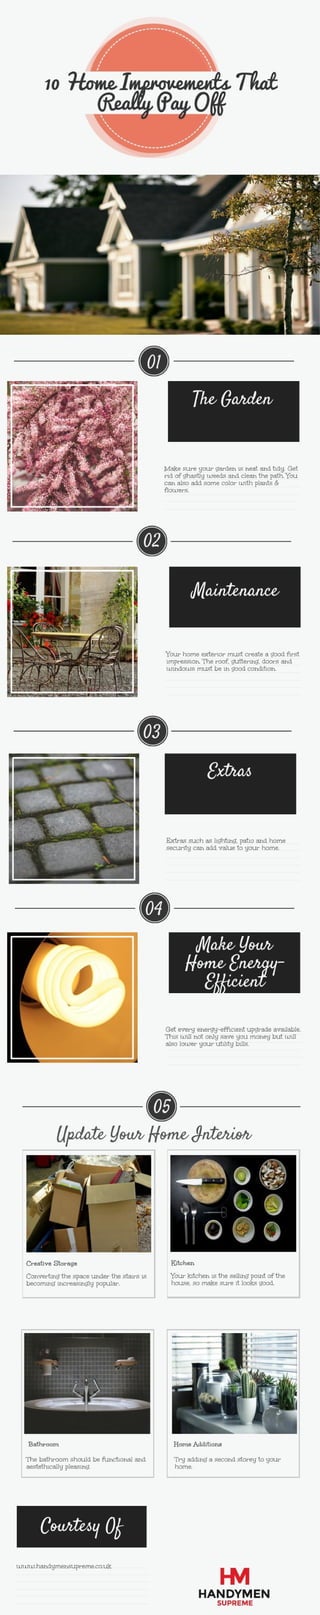 10 Home Improvements That Really Pay Off!